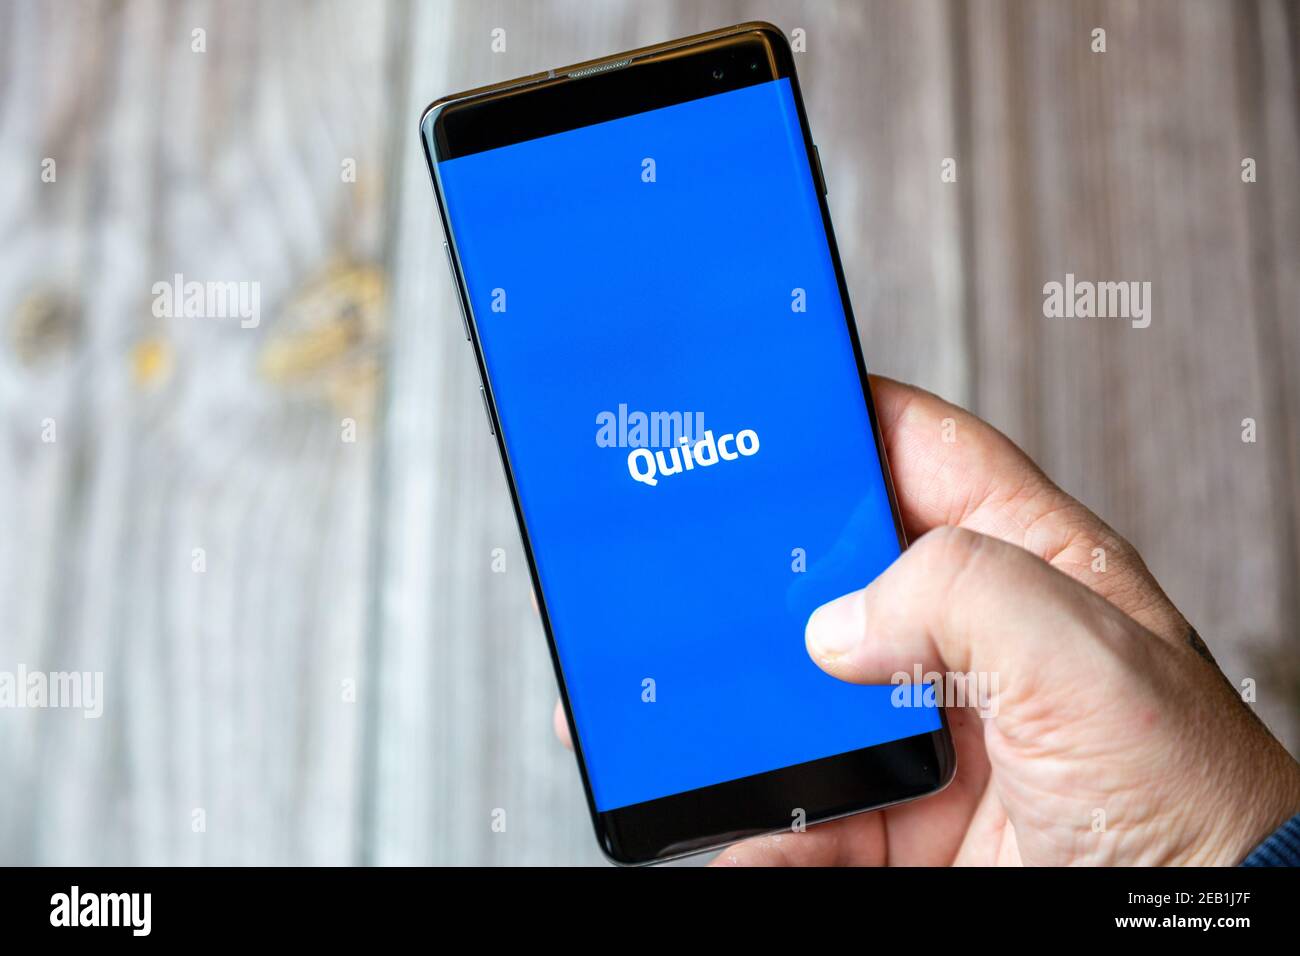 A mobile phone or cell phone being held by a hand with the Quidco app open on screen Stock Photo